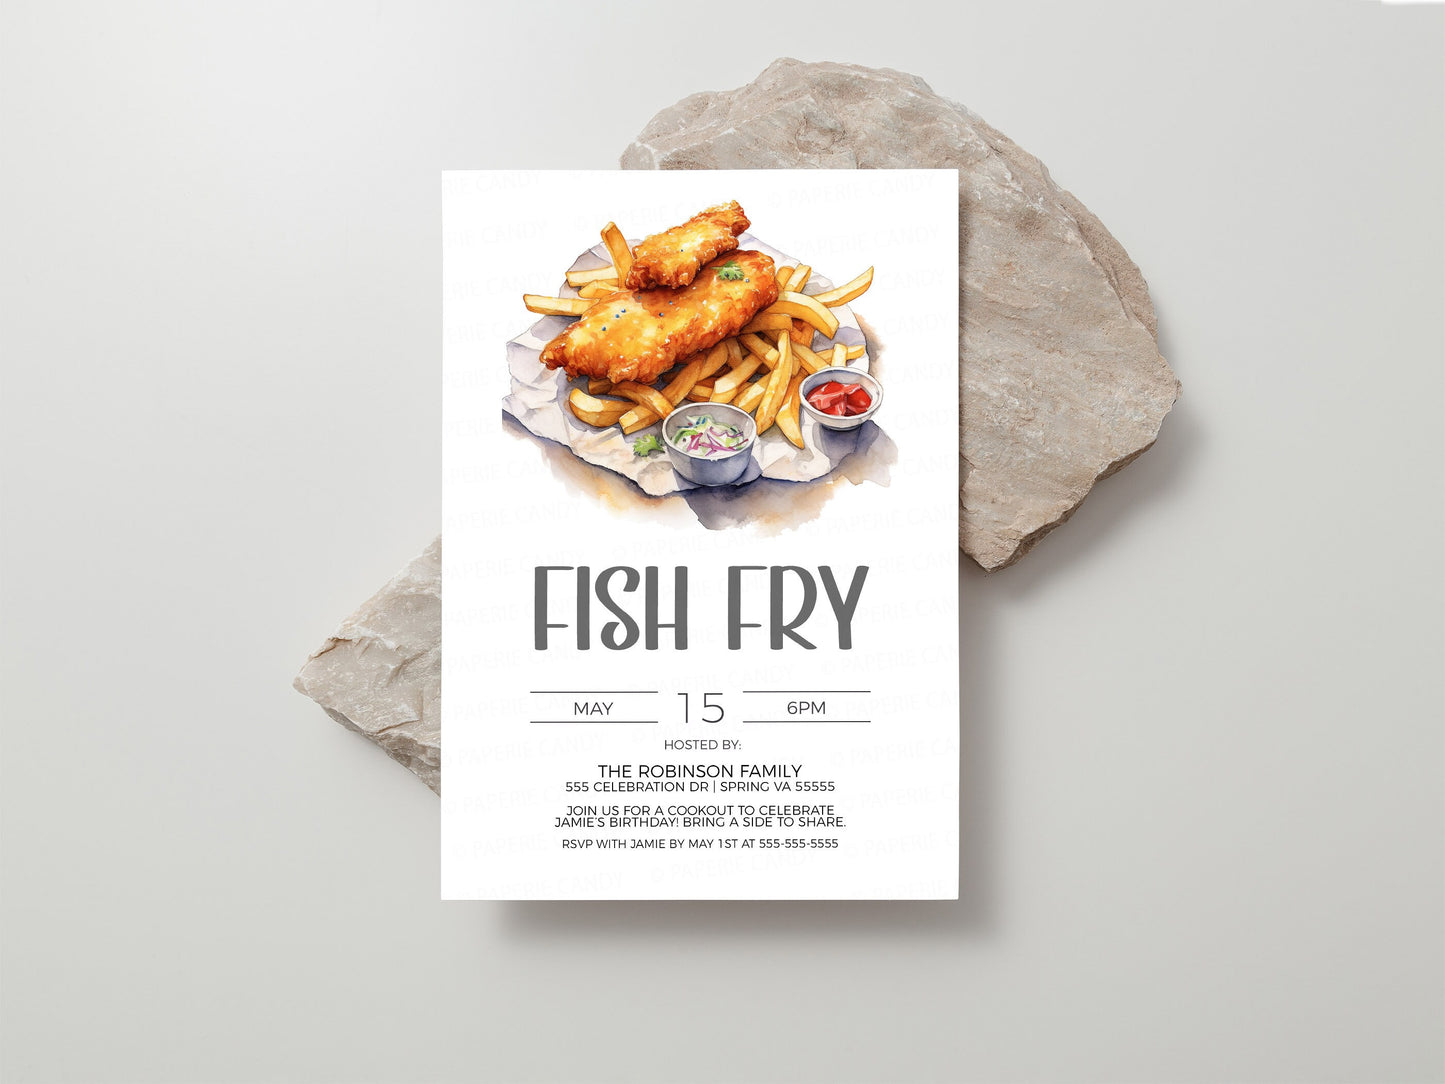 Fish Fry Invitation, Fish And Chips Invite, Seafood Birthday Party, Fish Fry Flyer, Fish Fry Competition, Printable Template Fundraiser